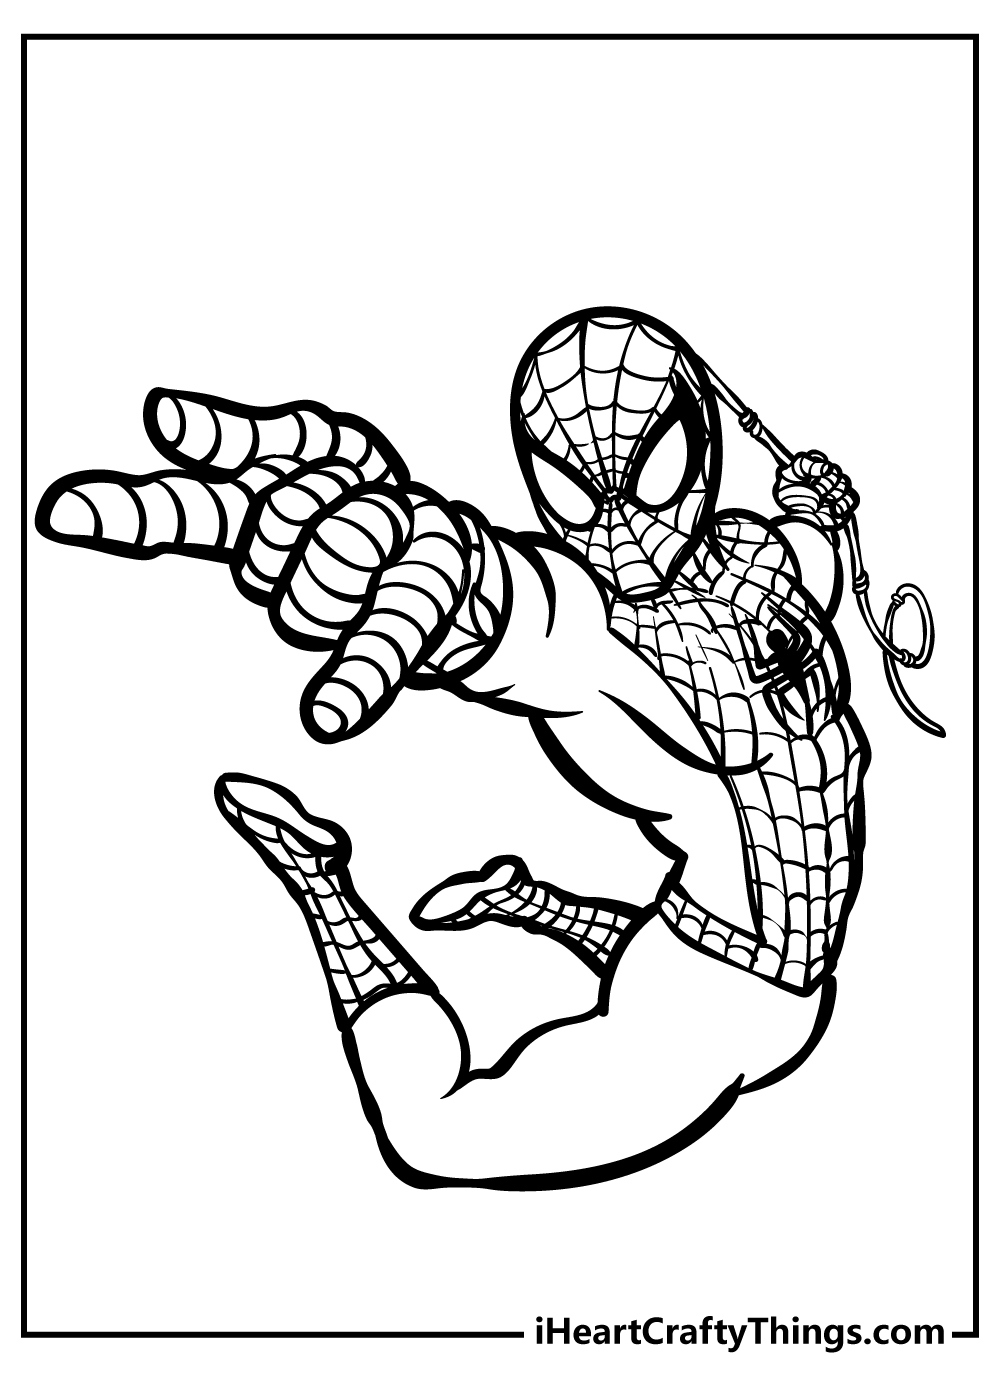 Spider-Man Coloring Sheet for children free download